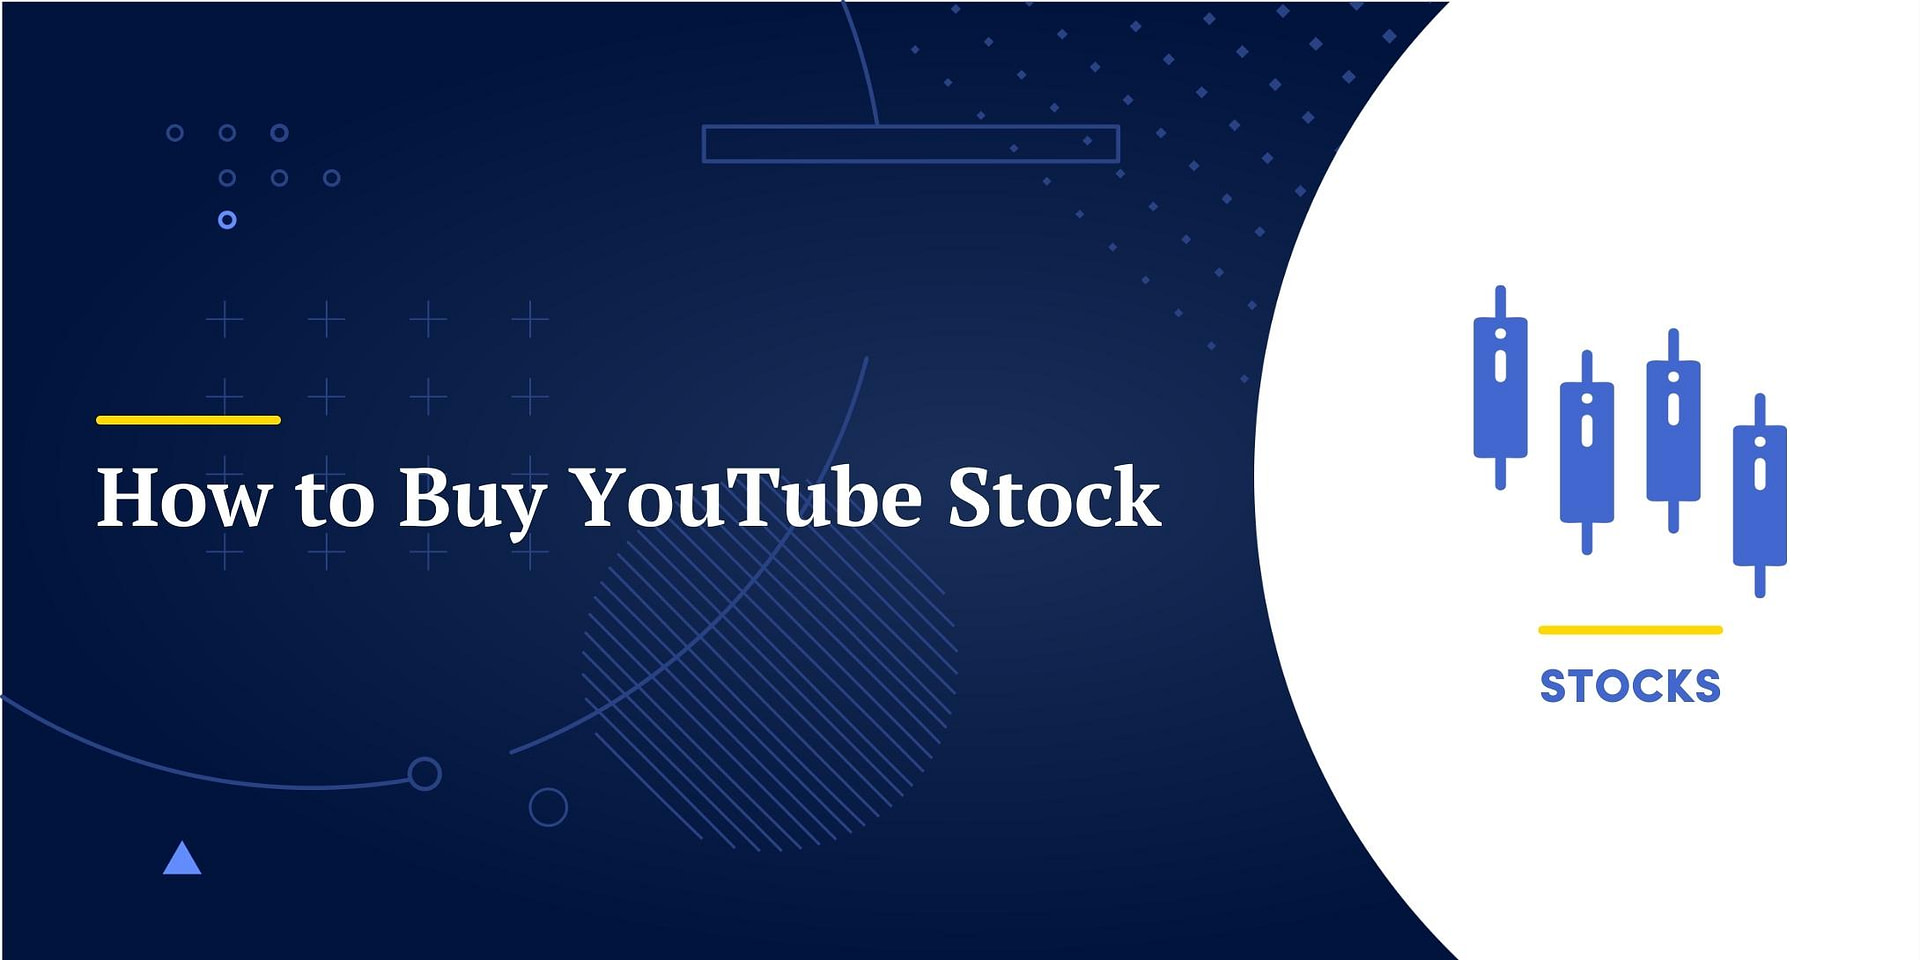 Is there a YouTube stock?